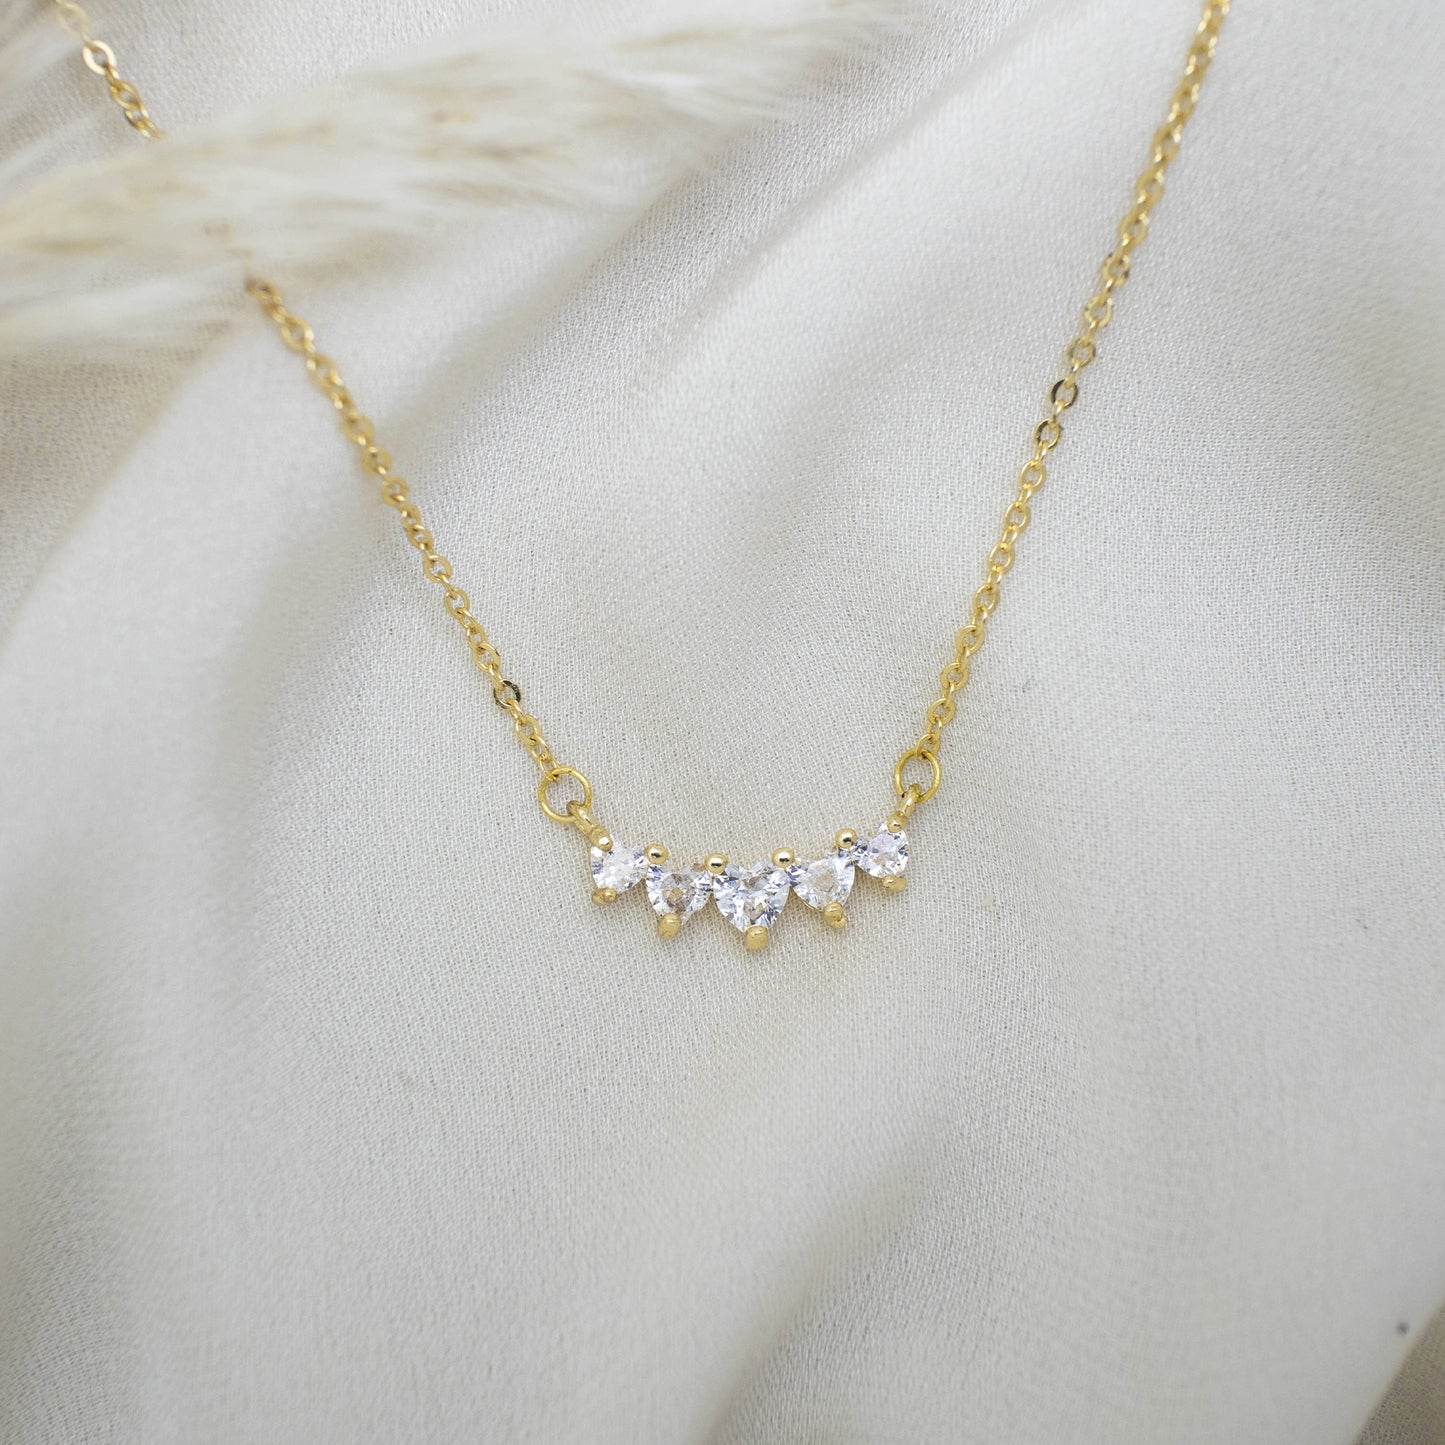 This photo features a thin chain necklace made of 14K gold-plated sterling silver, paired with a rectangular tag pendant with Five Zircon Heart Necklace